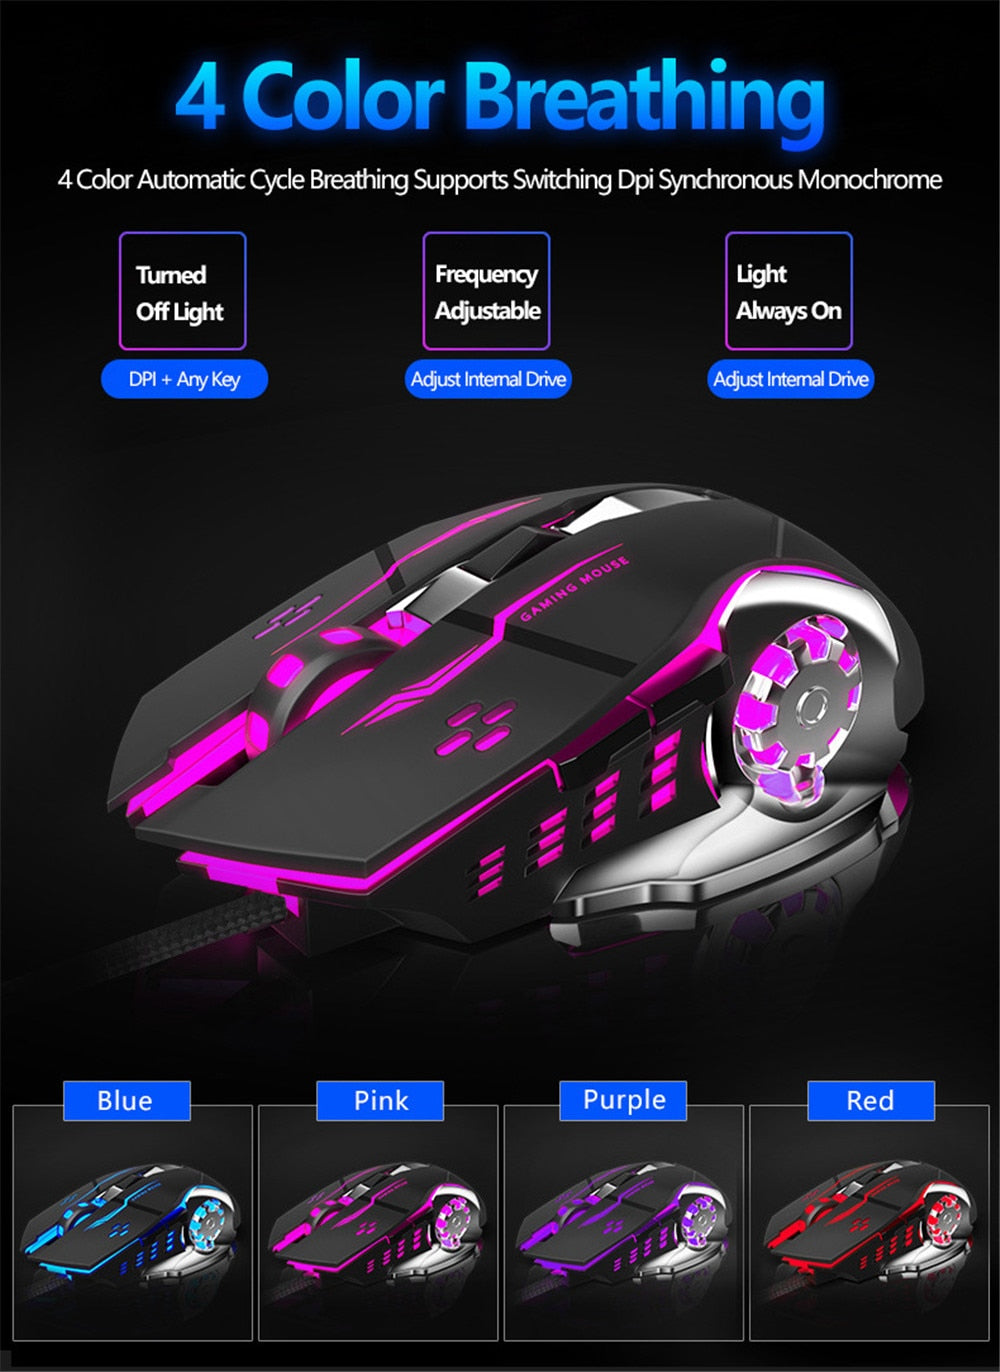 AULA S20 Professional Gaming Mouse 2400 DPI Adjustable USB Wired Backlit Ergonomic Optical LED Mouse for Computer Laptop PC